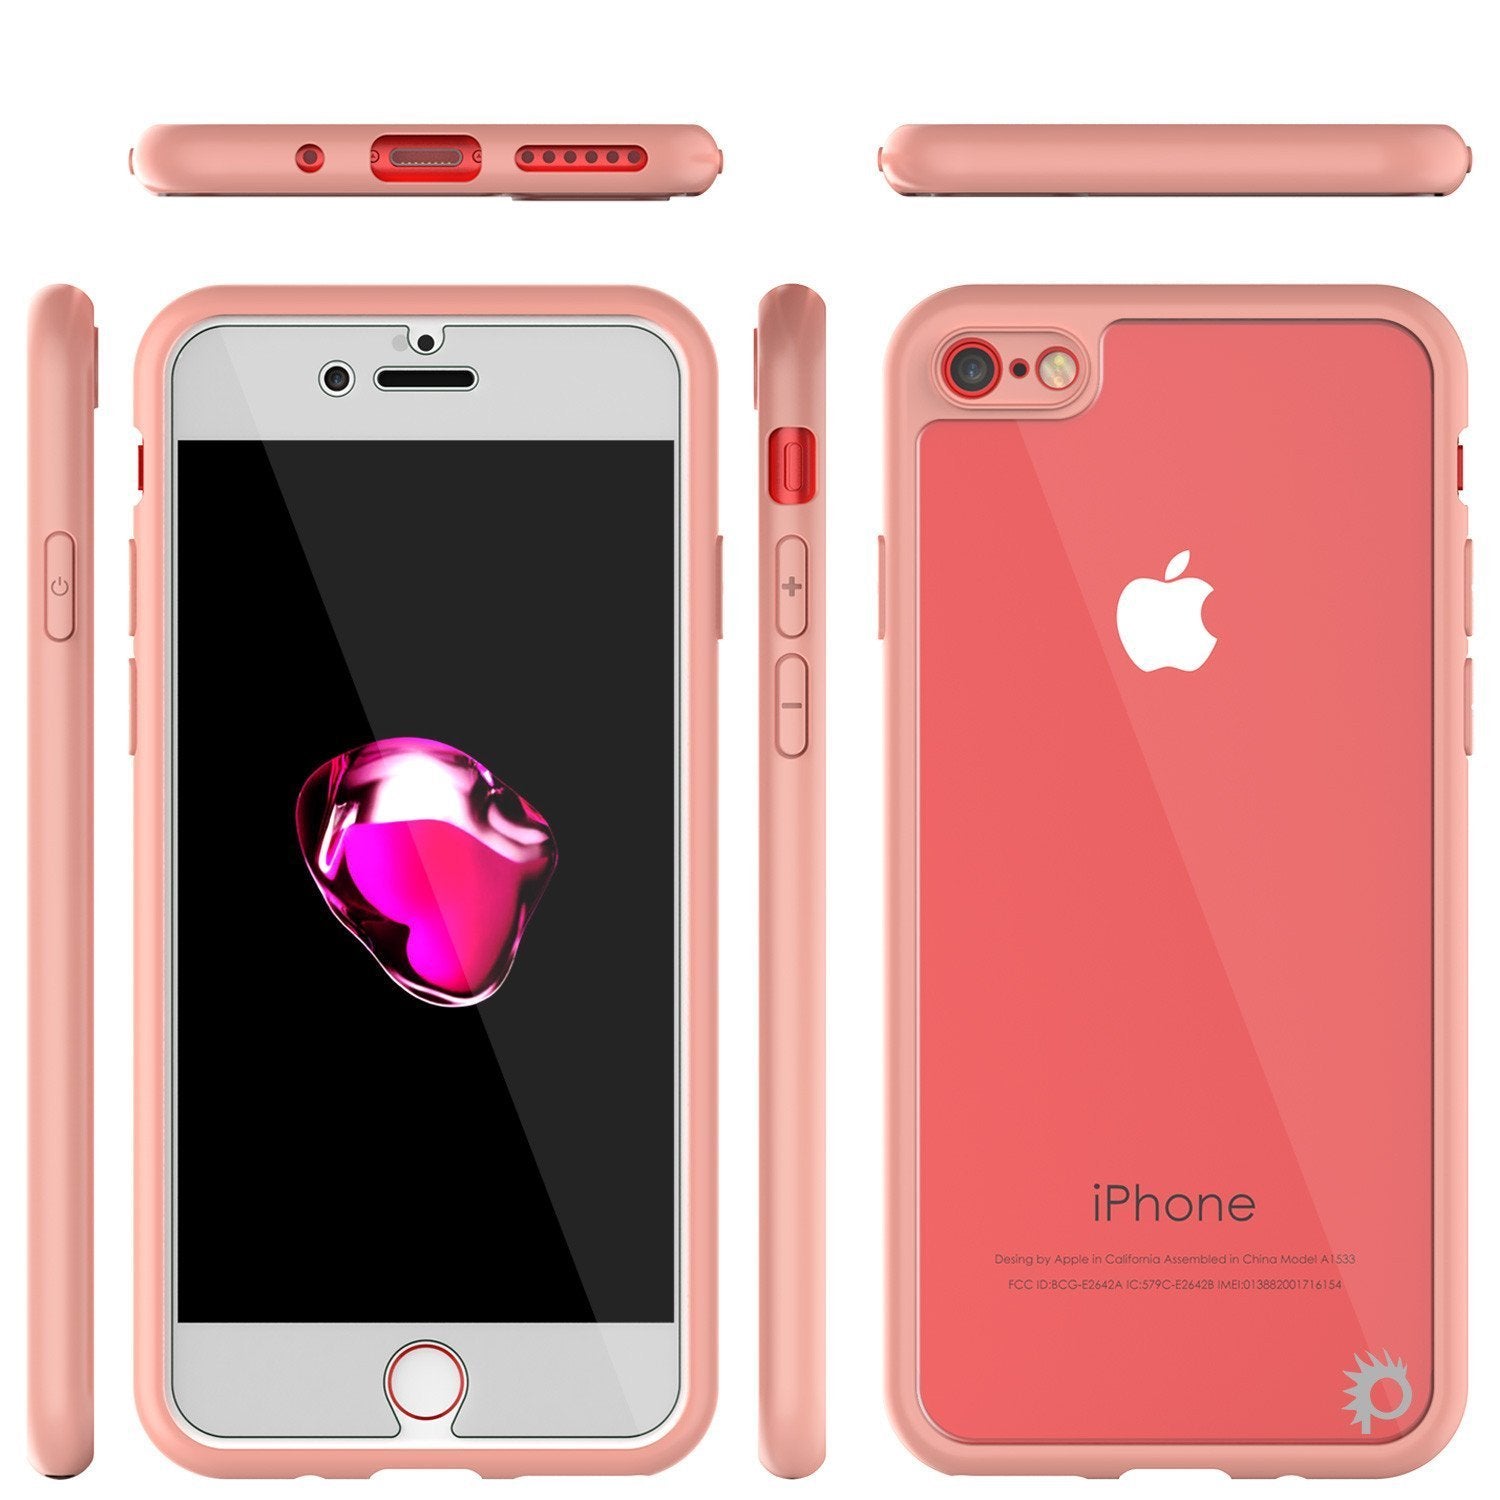 iPhone SE (4.7") Case [MASK Series] [PINK] Full Body Hybrid Dual Layer TPU Cover W/ protective Tempered Glass Screen Protector